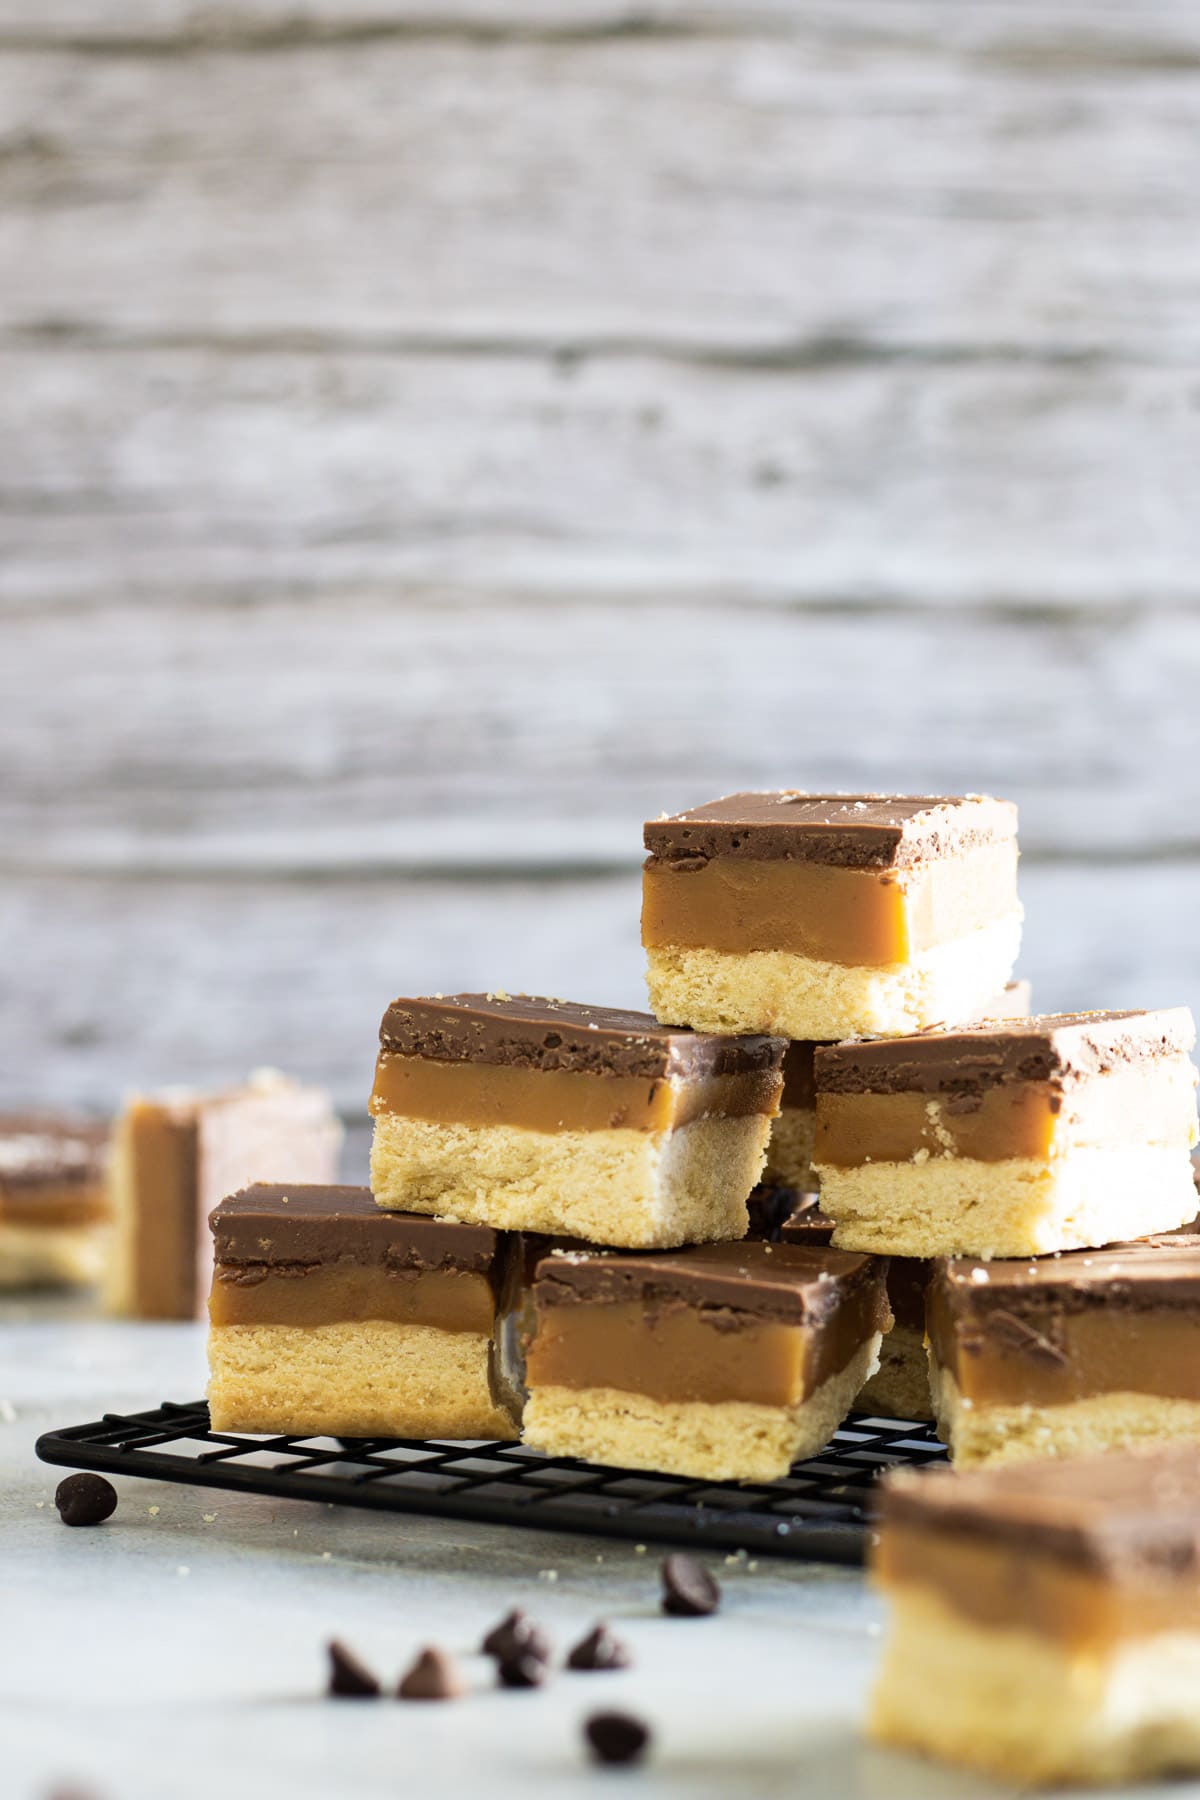 Millionaire's shortbread biscuits piled on top of each other